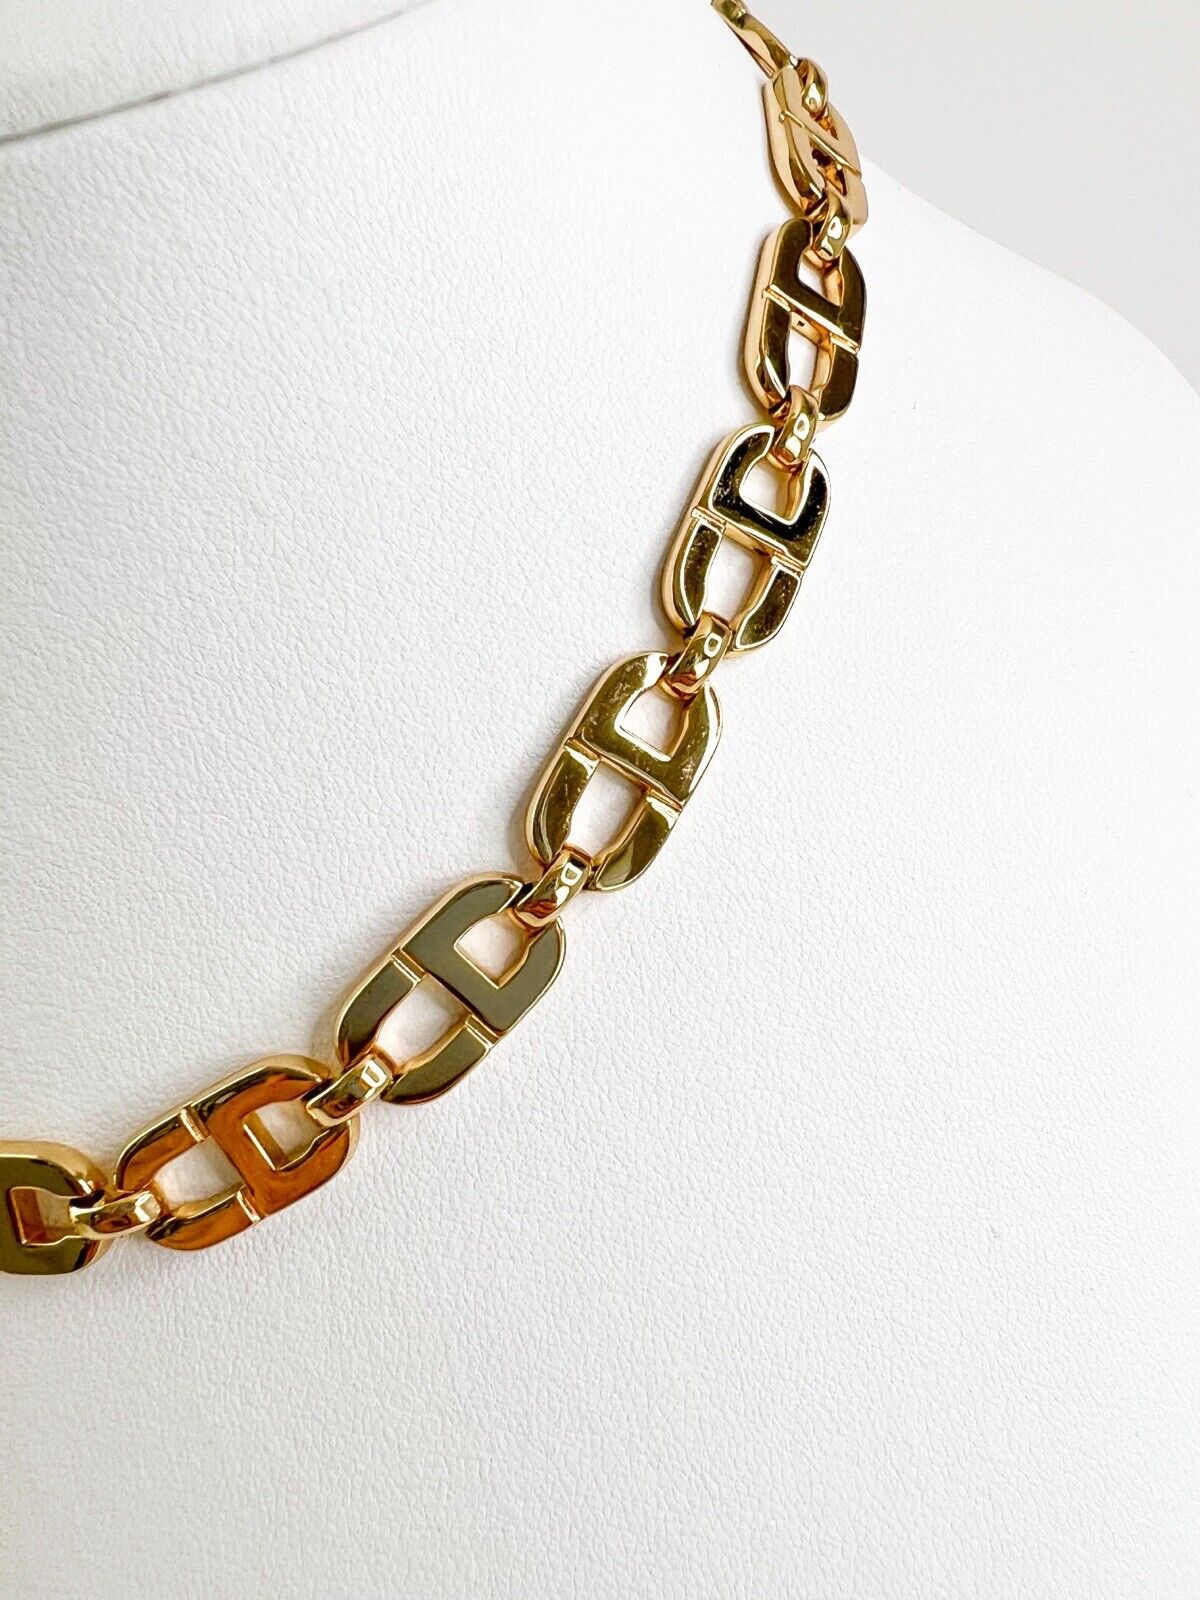 Christian Dior Vintage Chain Necklace, Gold Choker Necklace, CD Logo